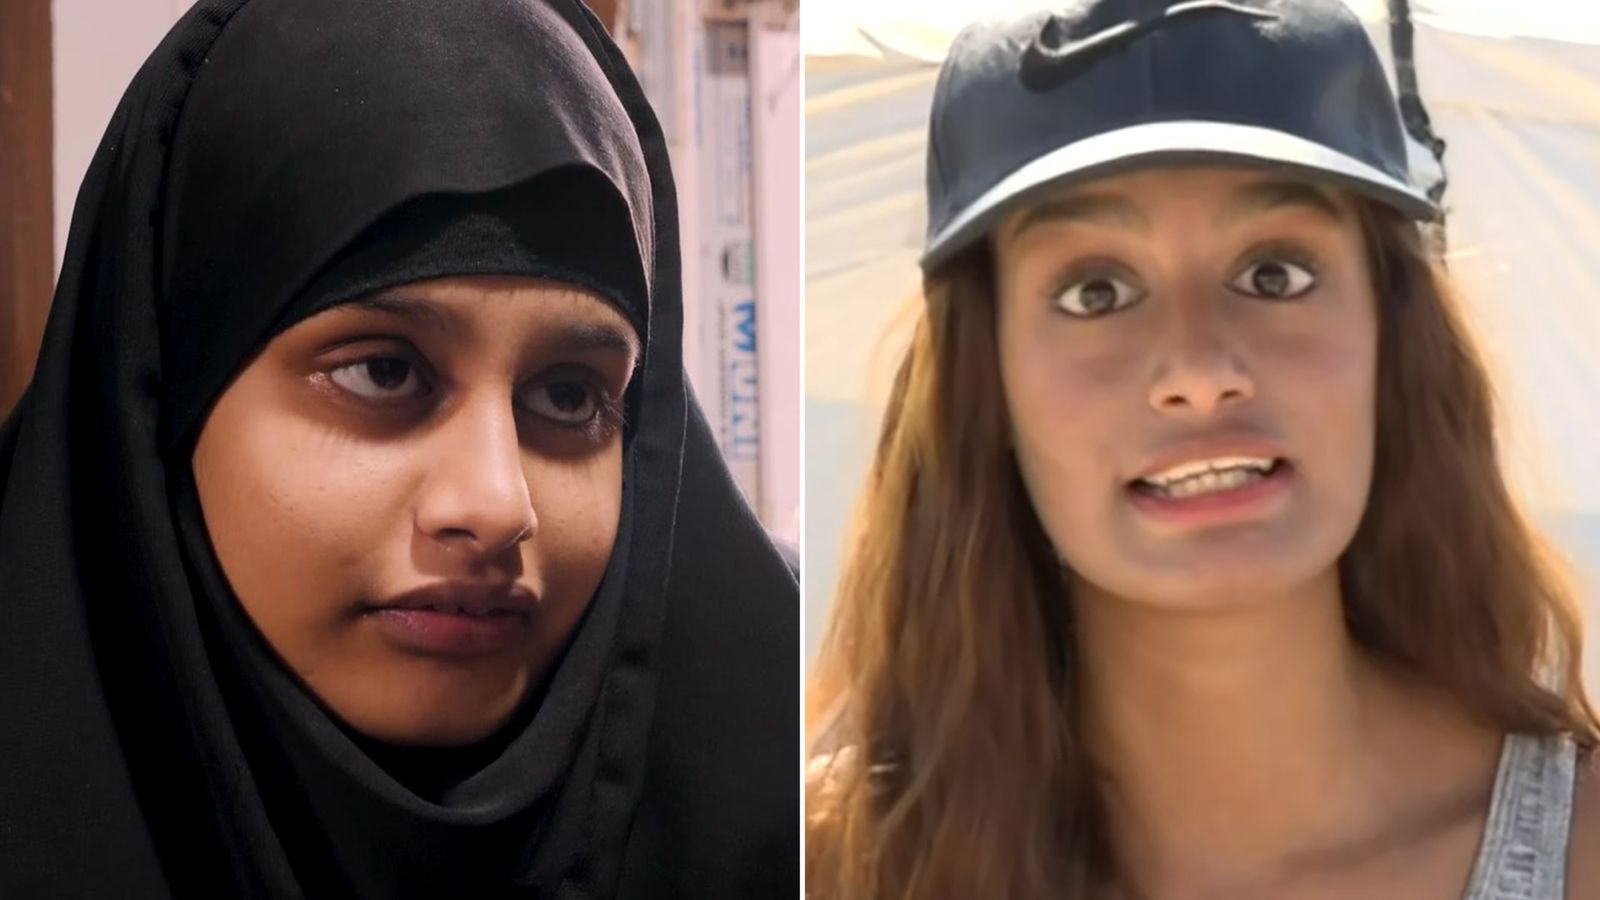 ISIS woman Shamina Begum wants to fight against terrorism